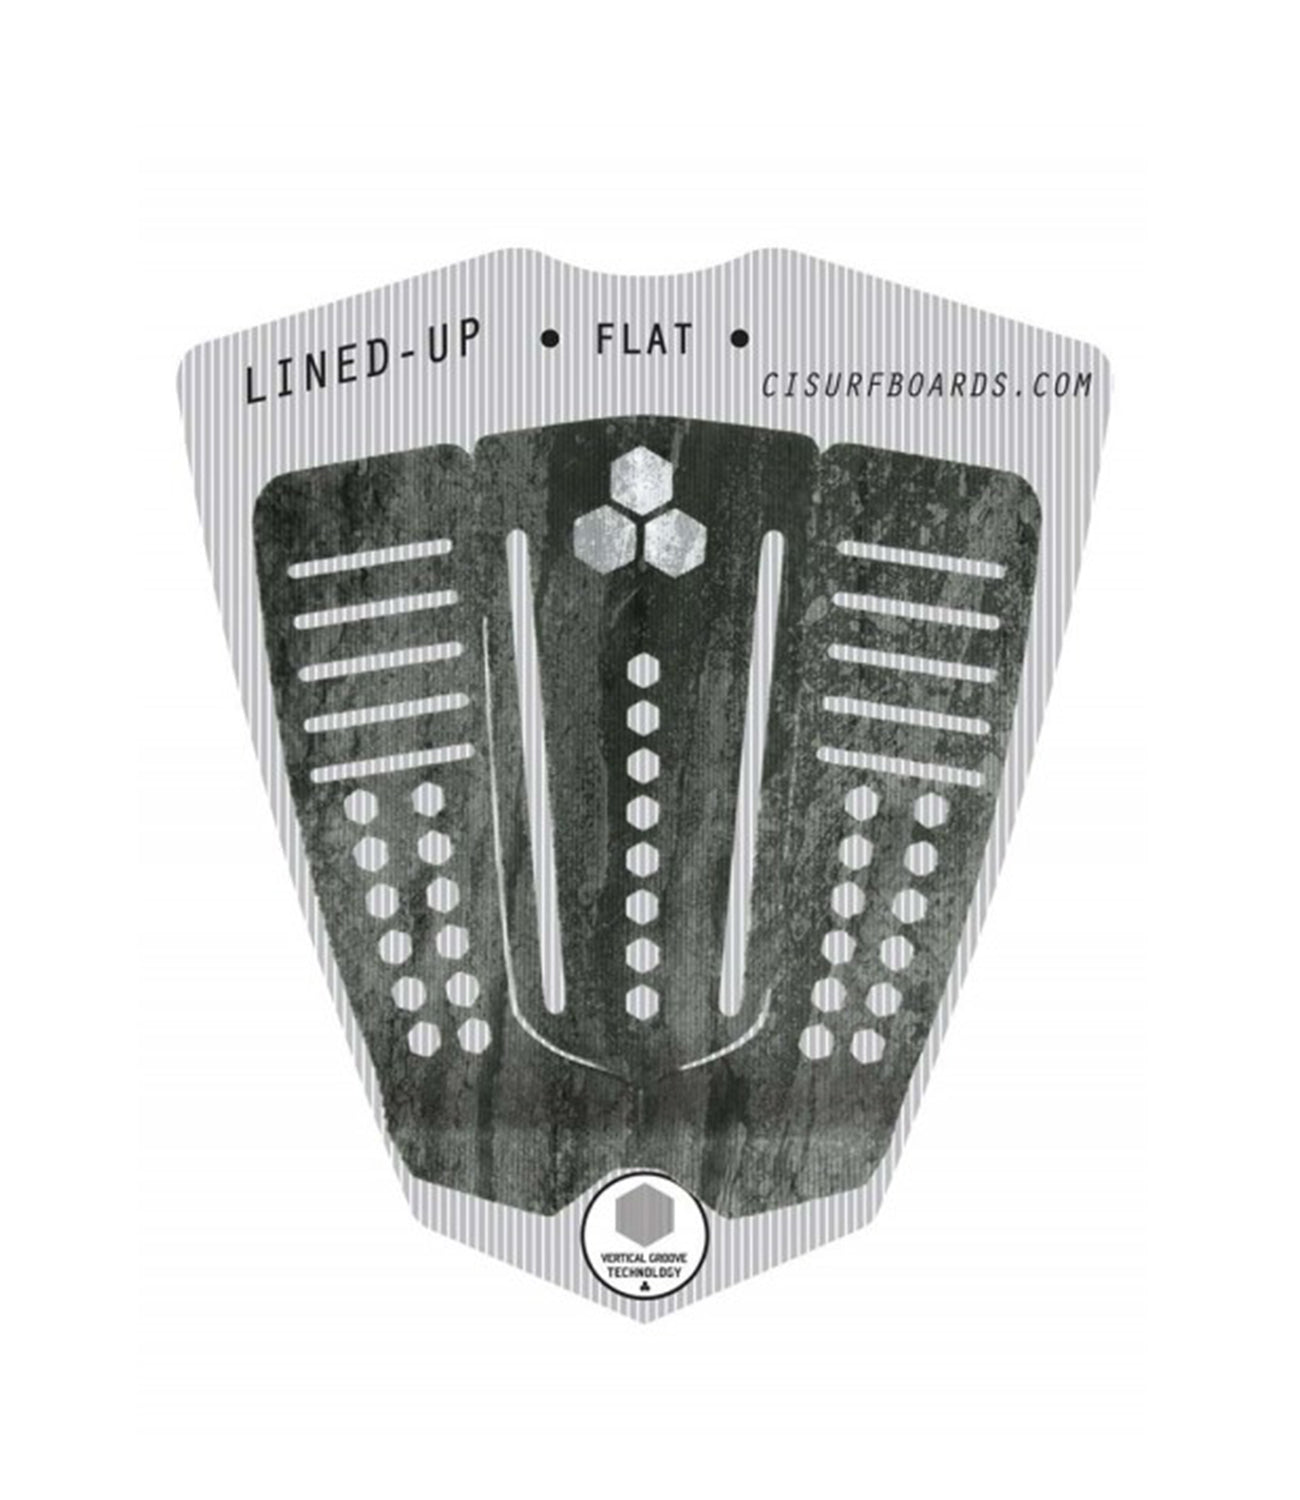 Channel Islands Surfboards Lined-Up Flat Traction Pad 3 Piece 993-Salt-and-Pepper